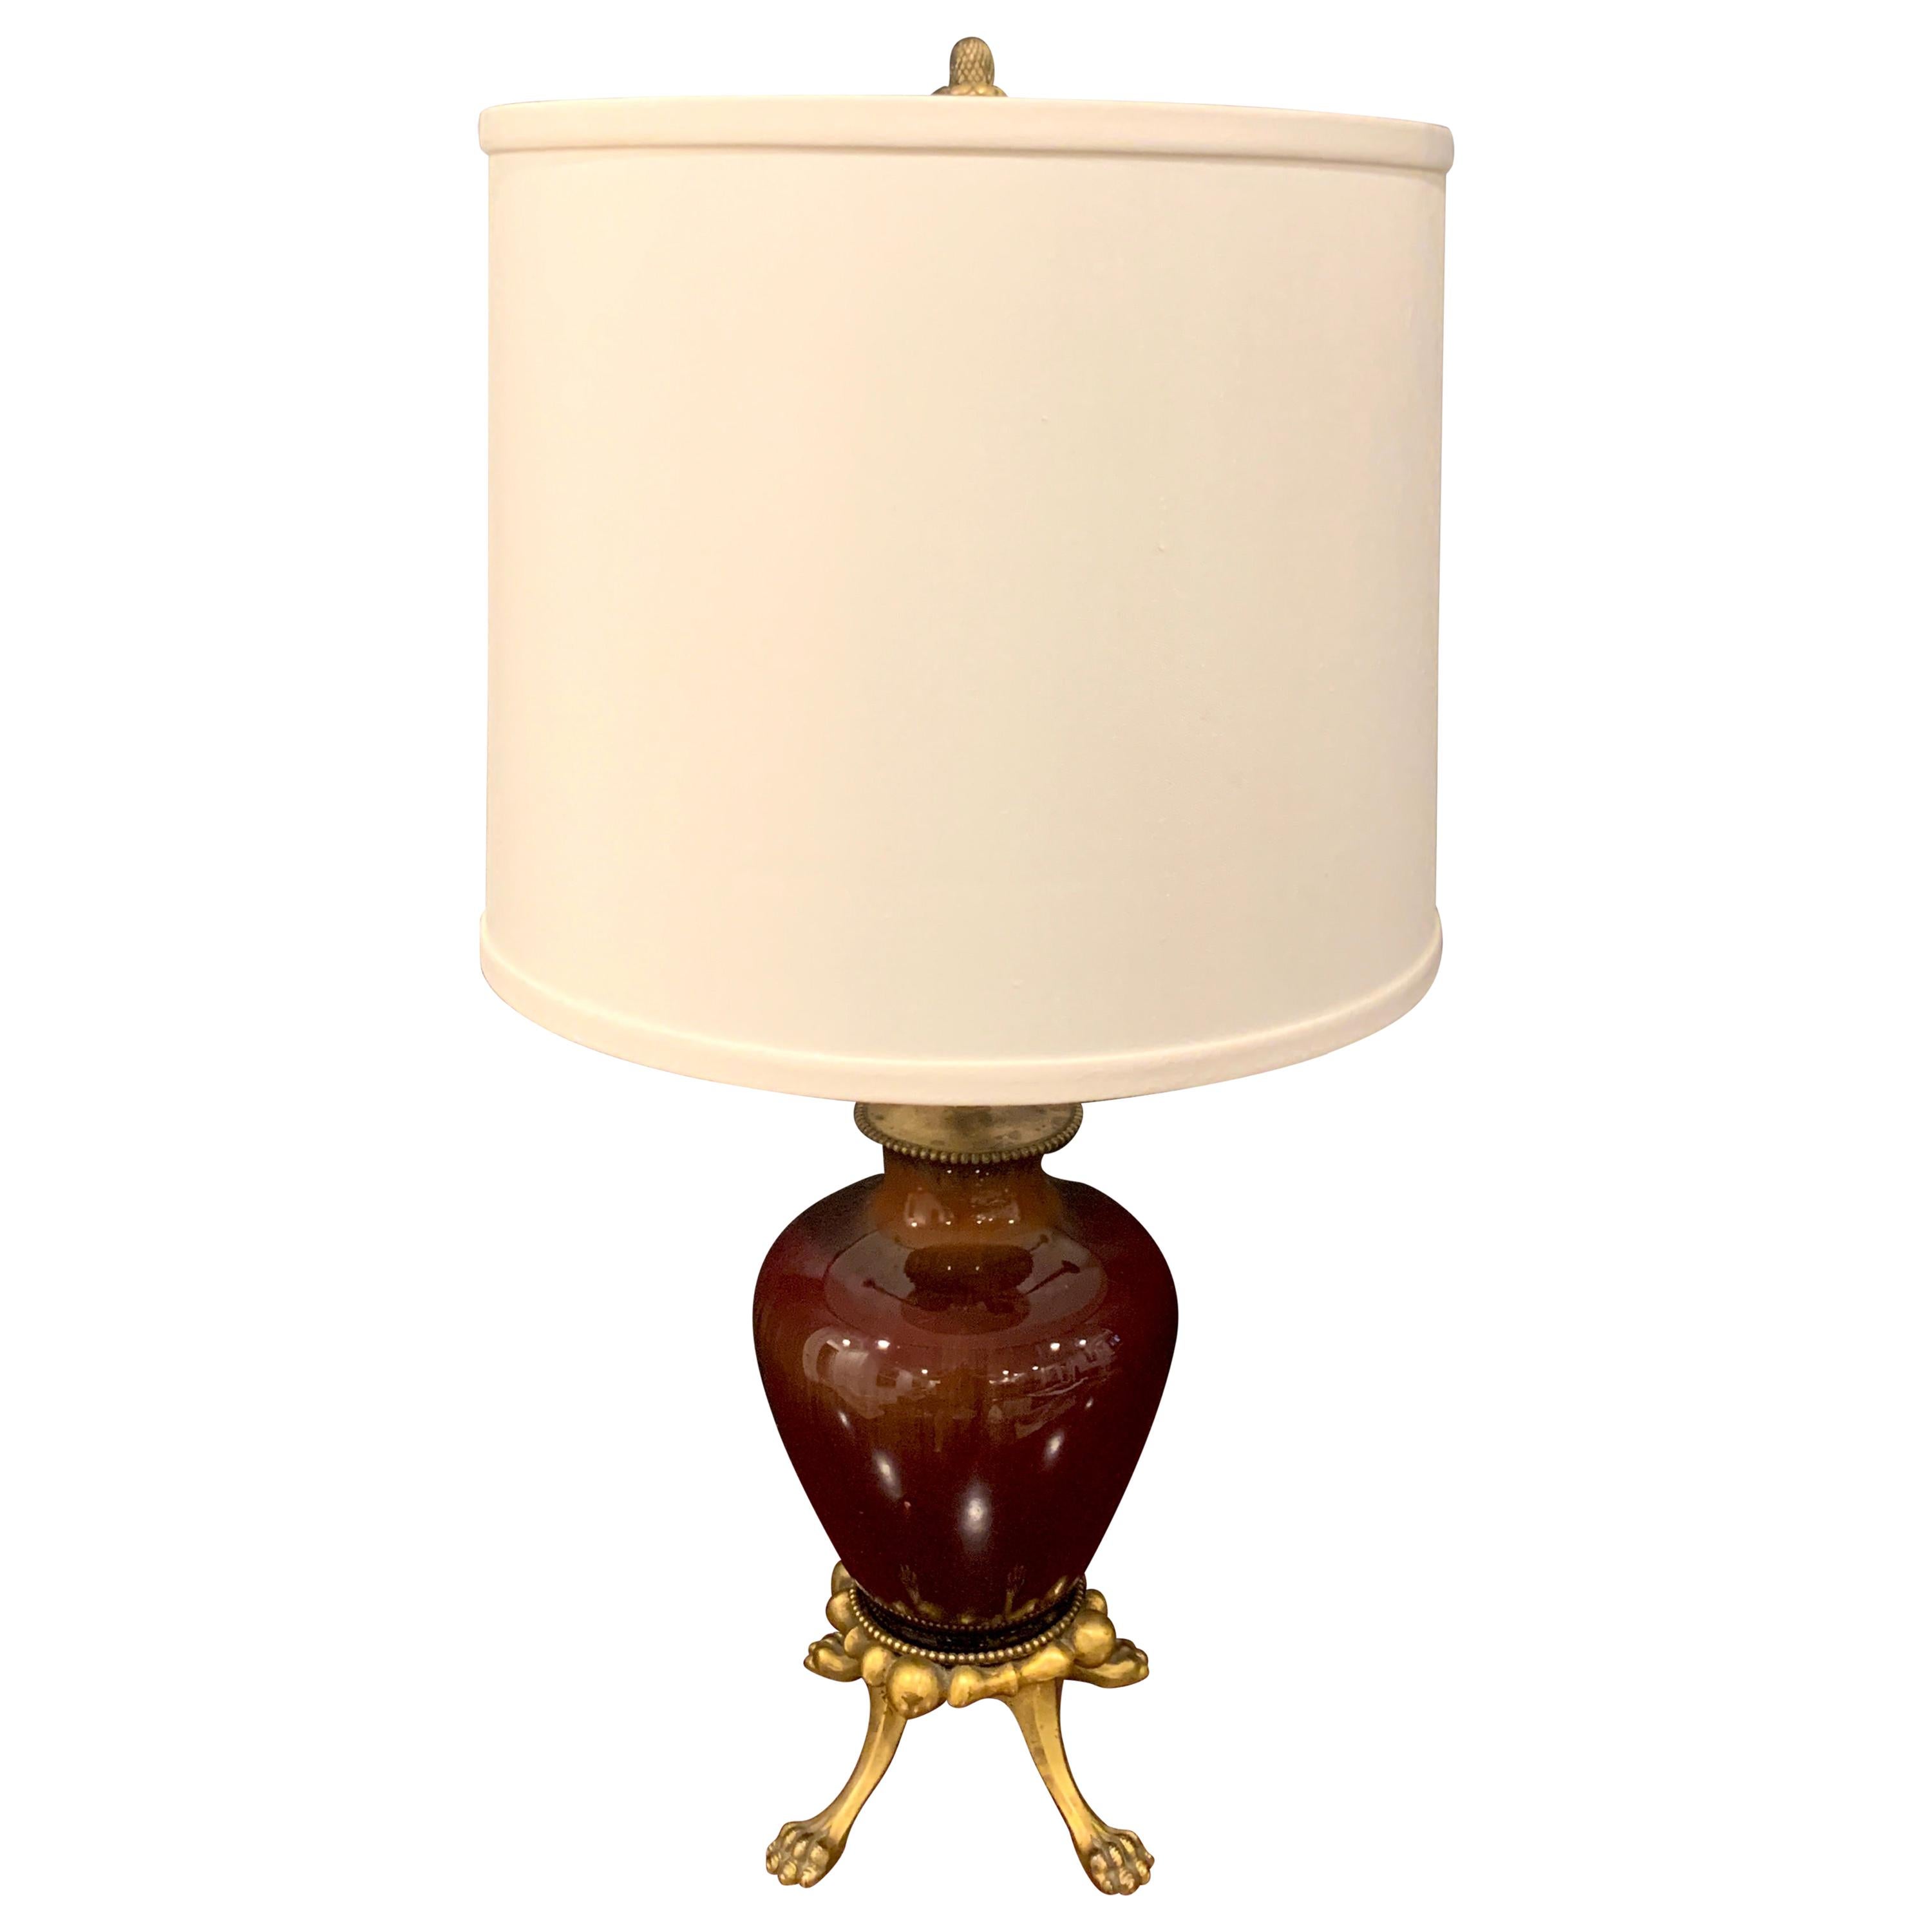 Sang de Boeuf, Ormolu Mounted Vase, by Rookwood 1936, now as a Lamp, Dark Glaze For Sale